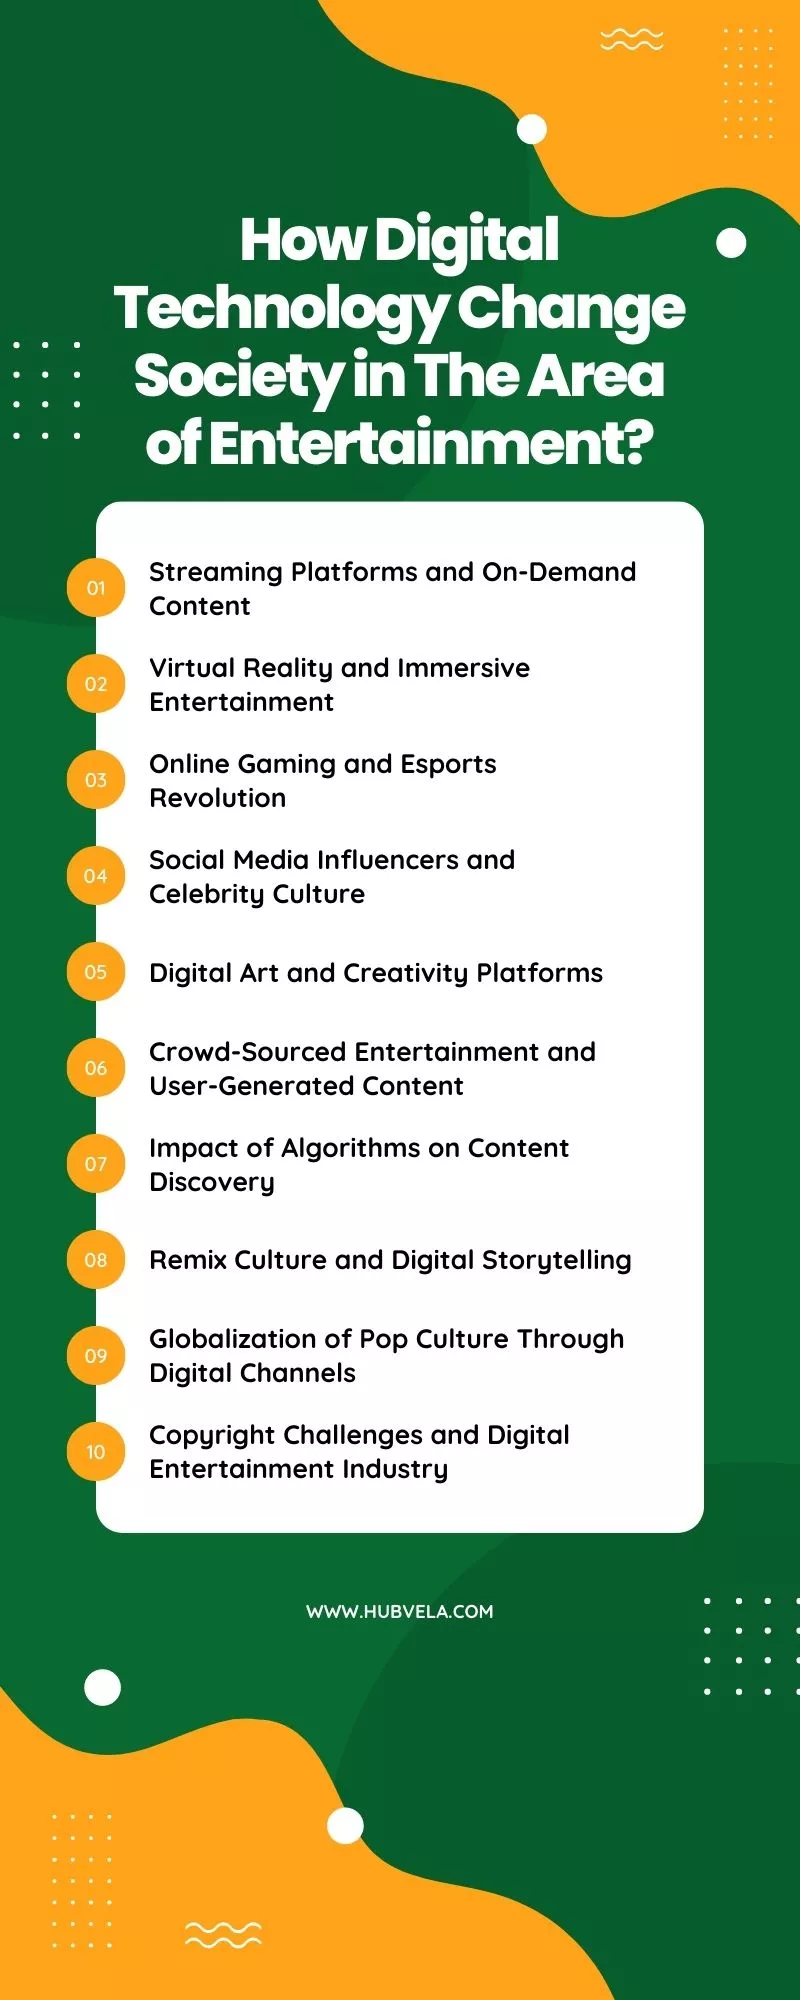 How Digital Technology Change Society in The Area of Entertainment Infographic